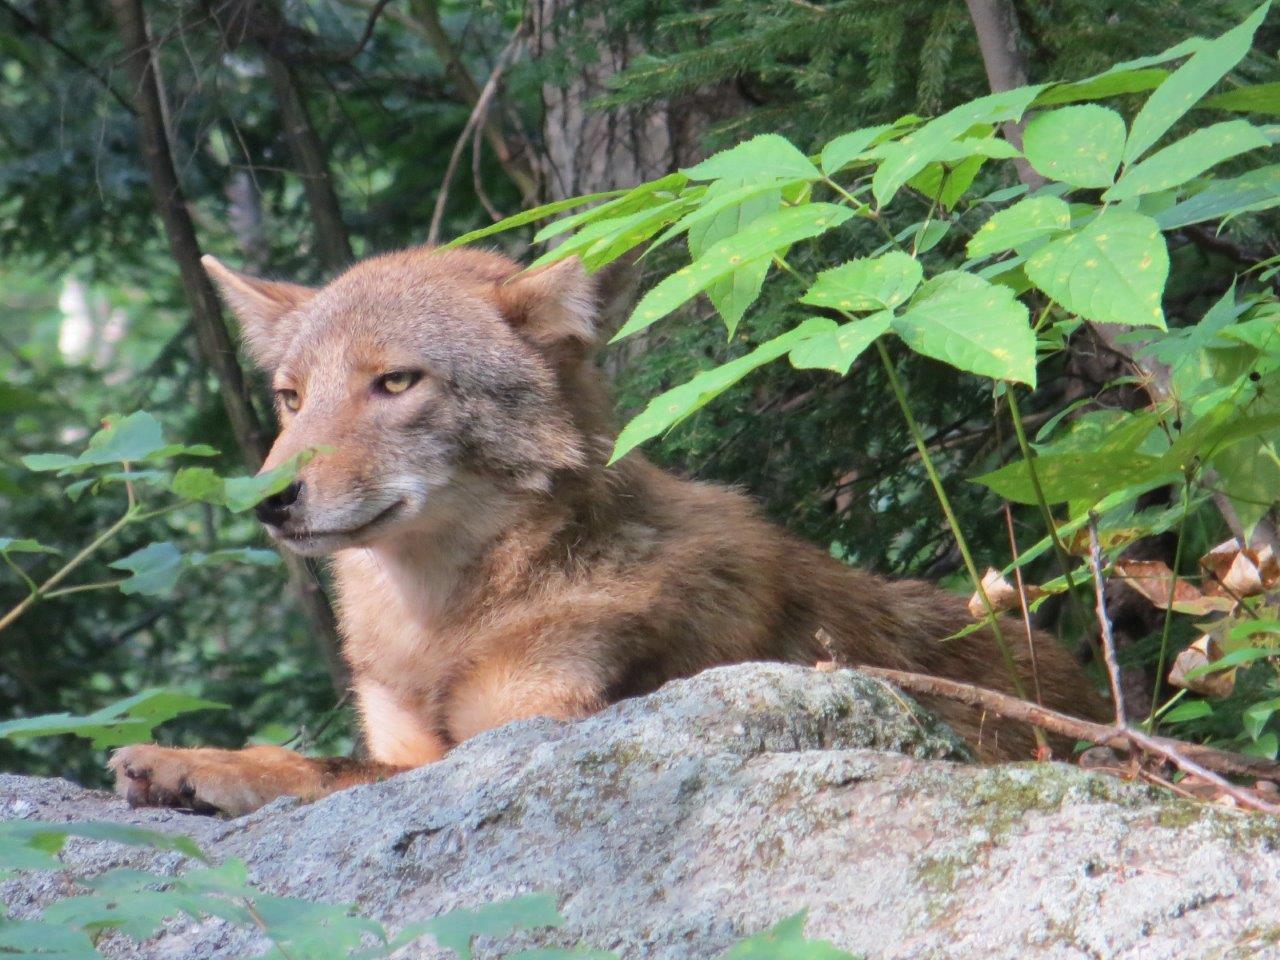 An Eastern coyote sits on a boulder. (photo © Don Nieratko)